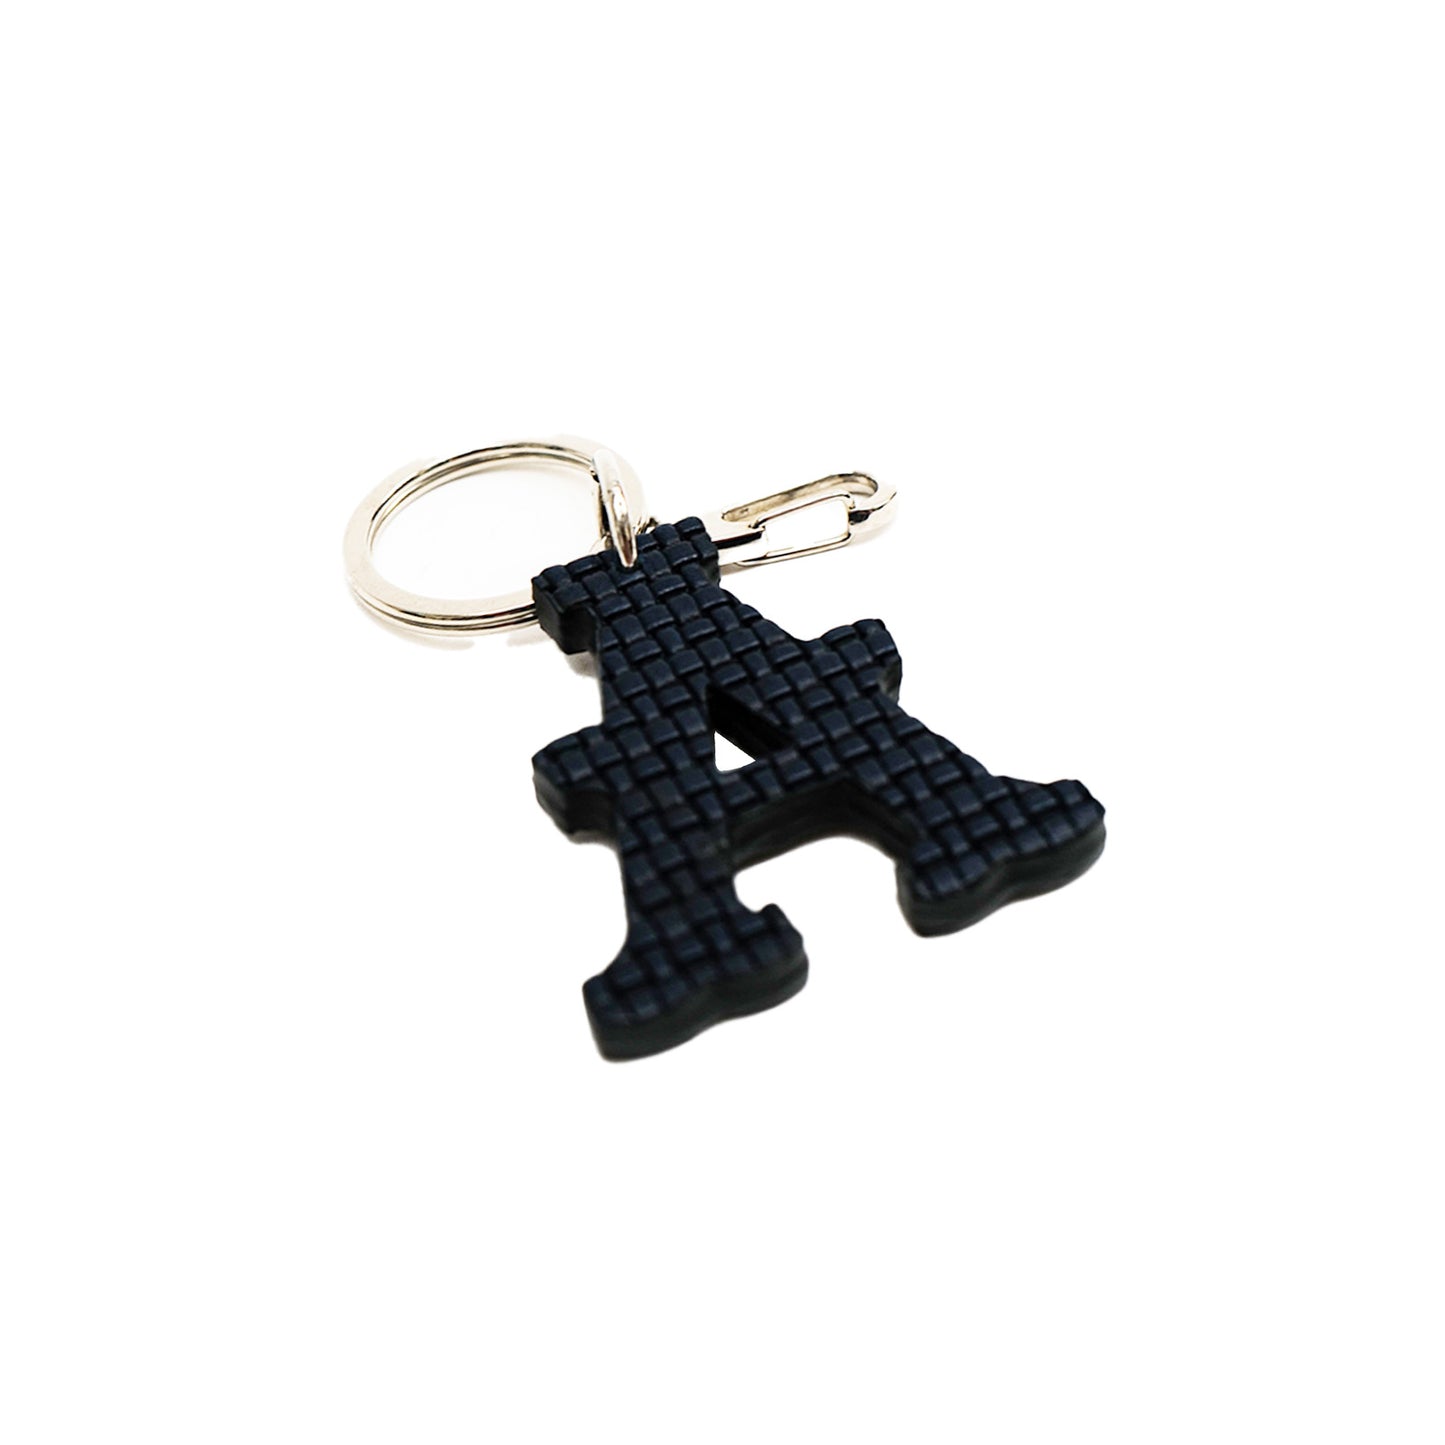 The Signature Initial A Key Ring